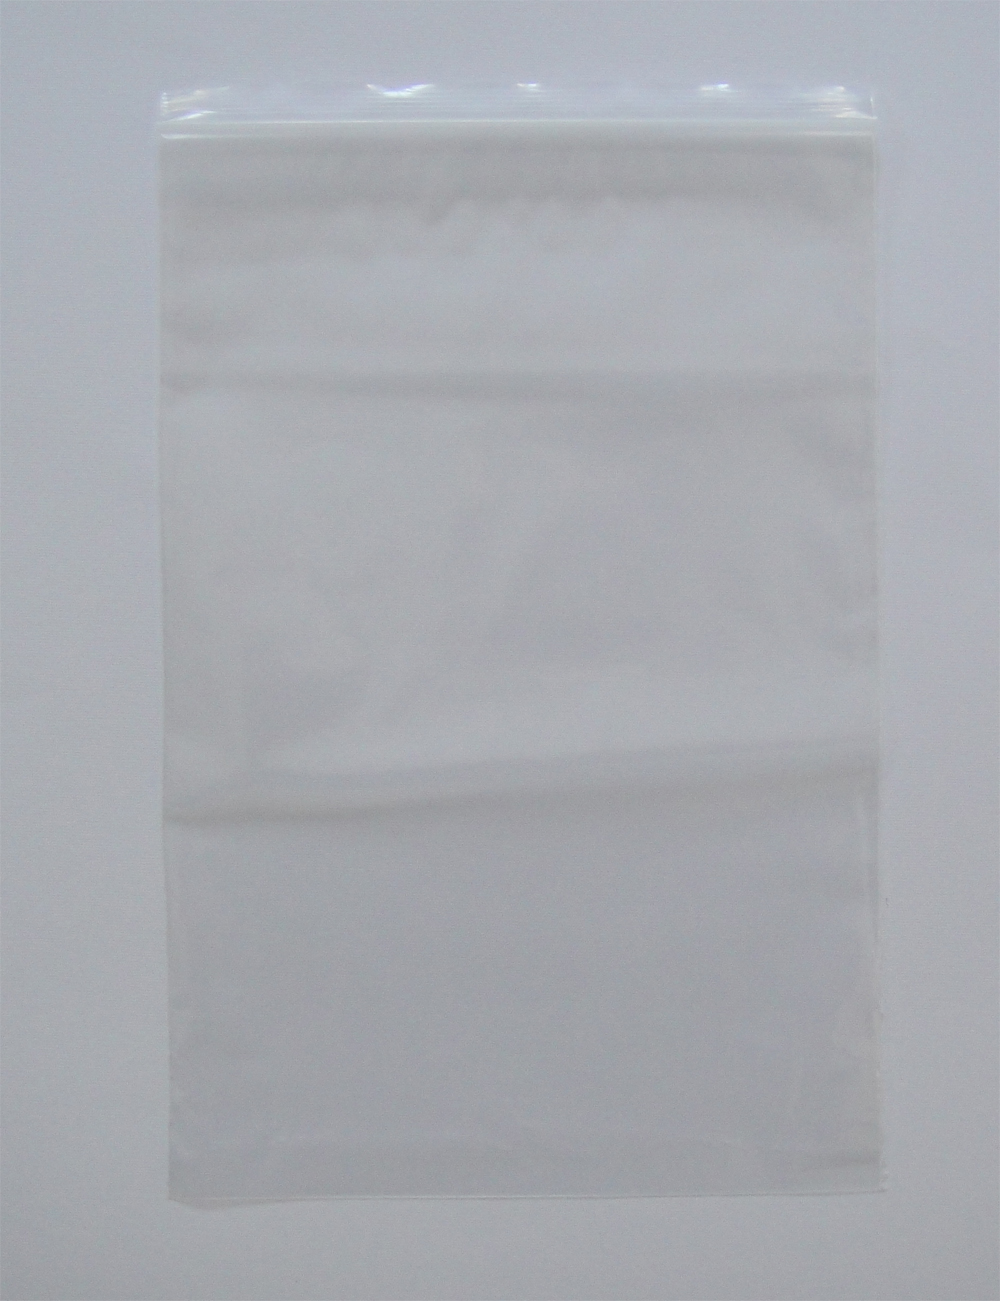 Heavy Duty Grip Seal Resealable Zip Lock Polythene Plastic Bags 300 g All Sizes 